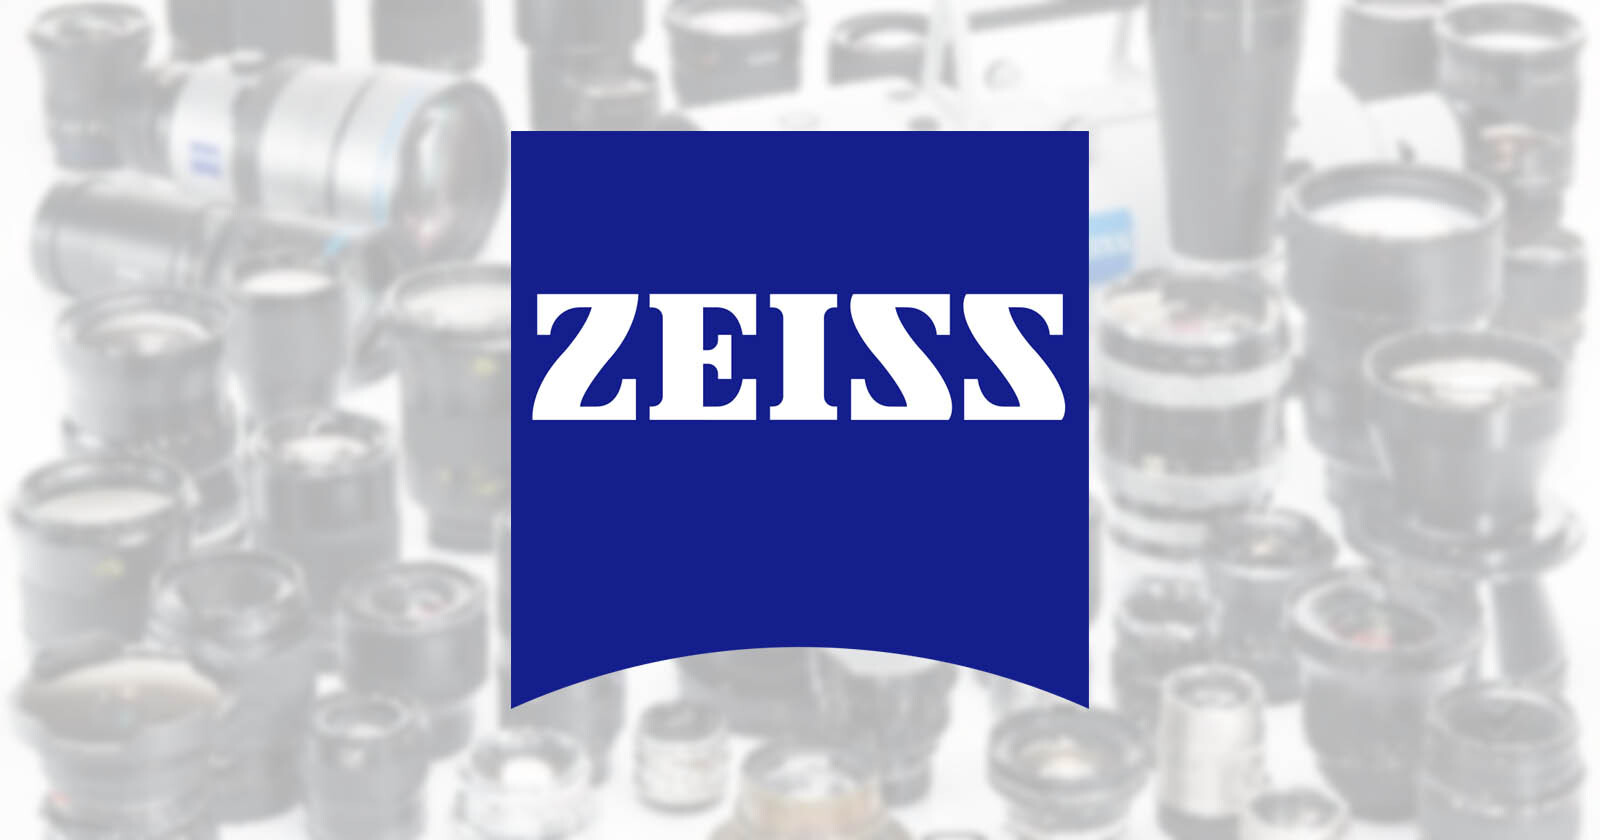 UPDATE: Zeiss Says It Has Not Left the Photo Industry